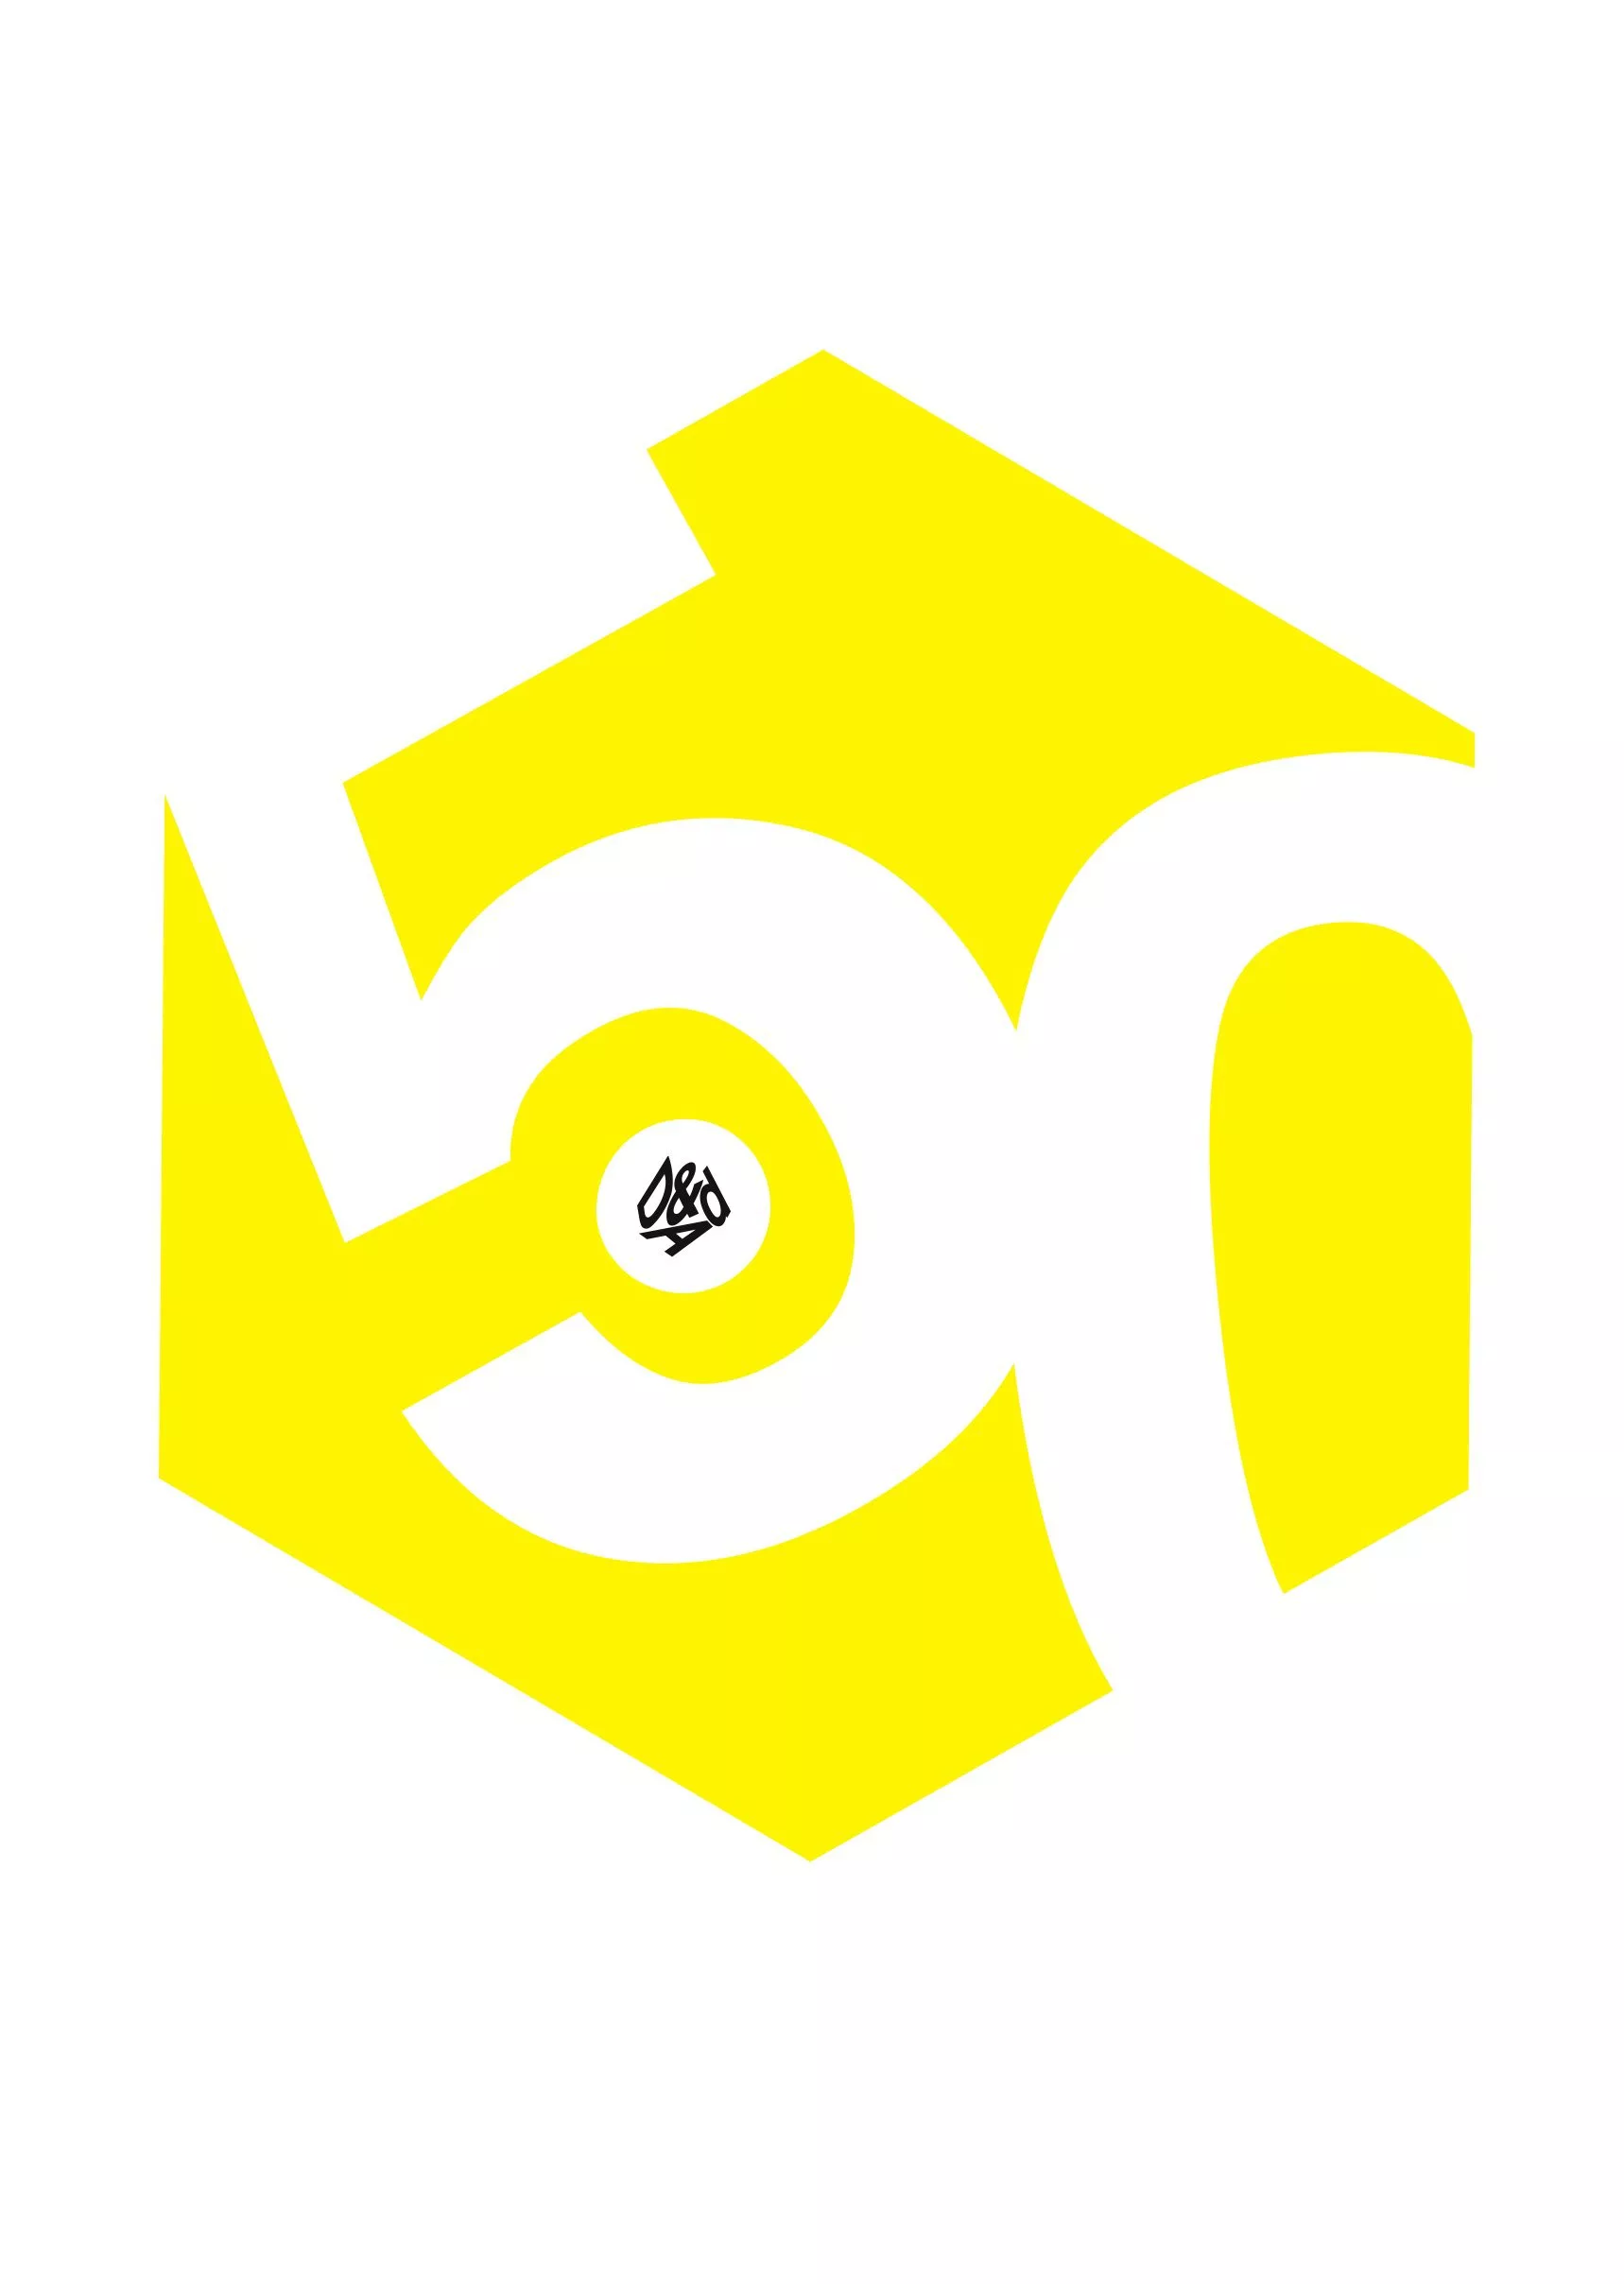 Rich result on google when search for "Design Studio, Packaging Design, Carlos Simpson Design" D&AD Logo with Yellow Hexagon and the number fitty